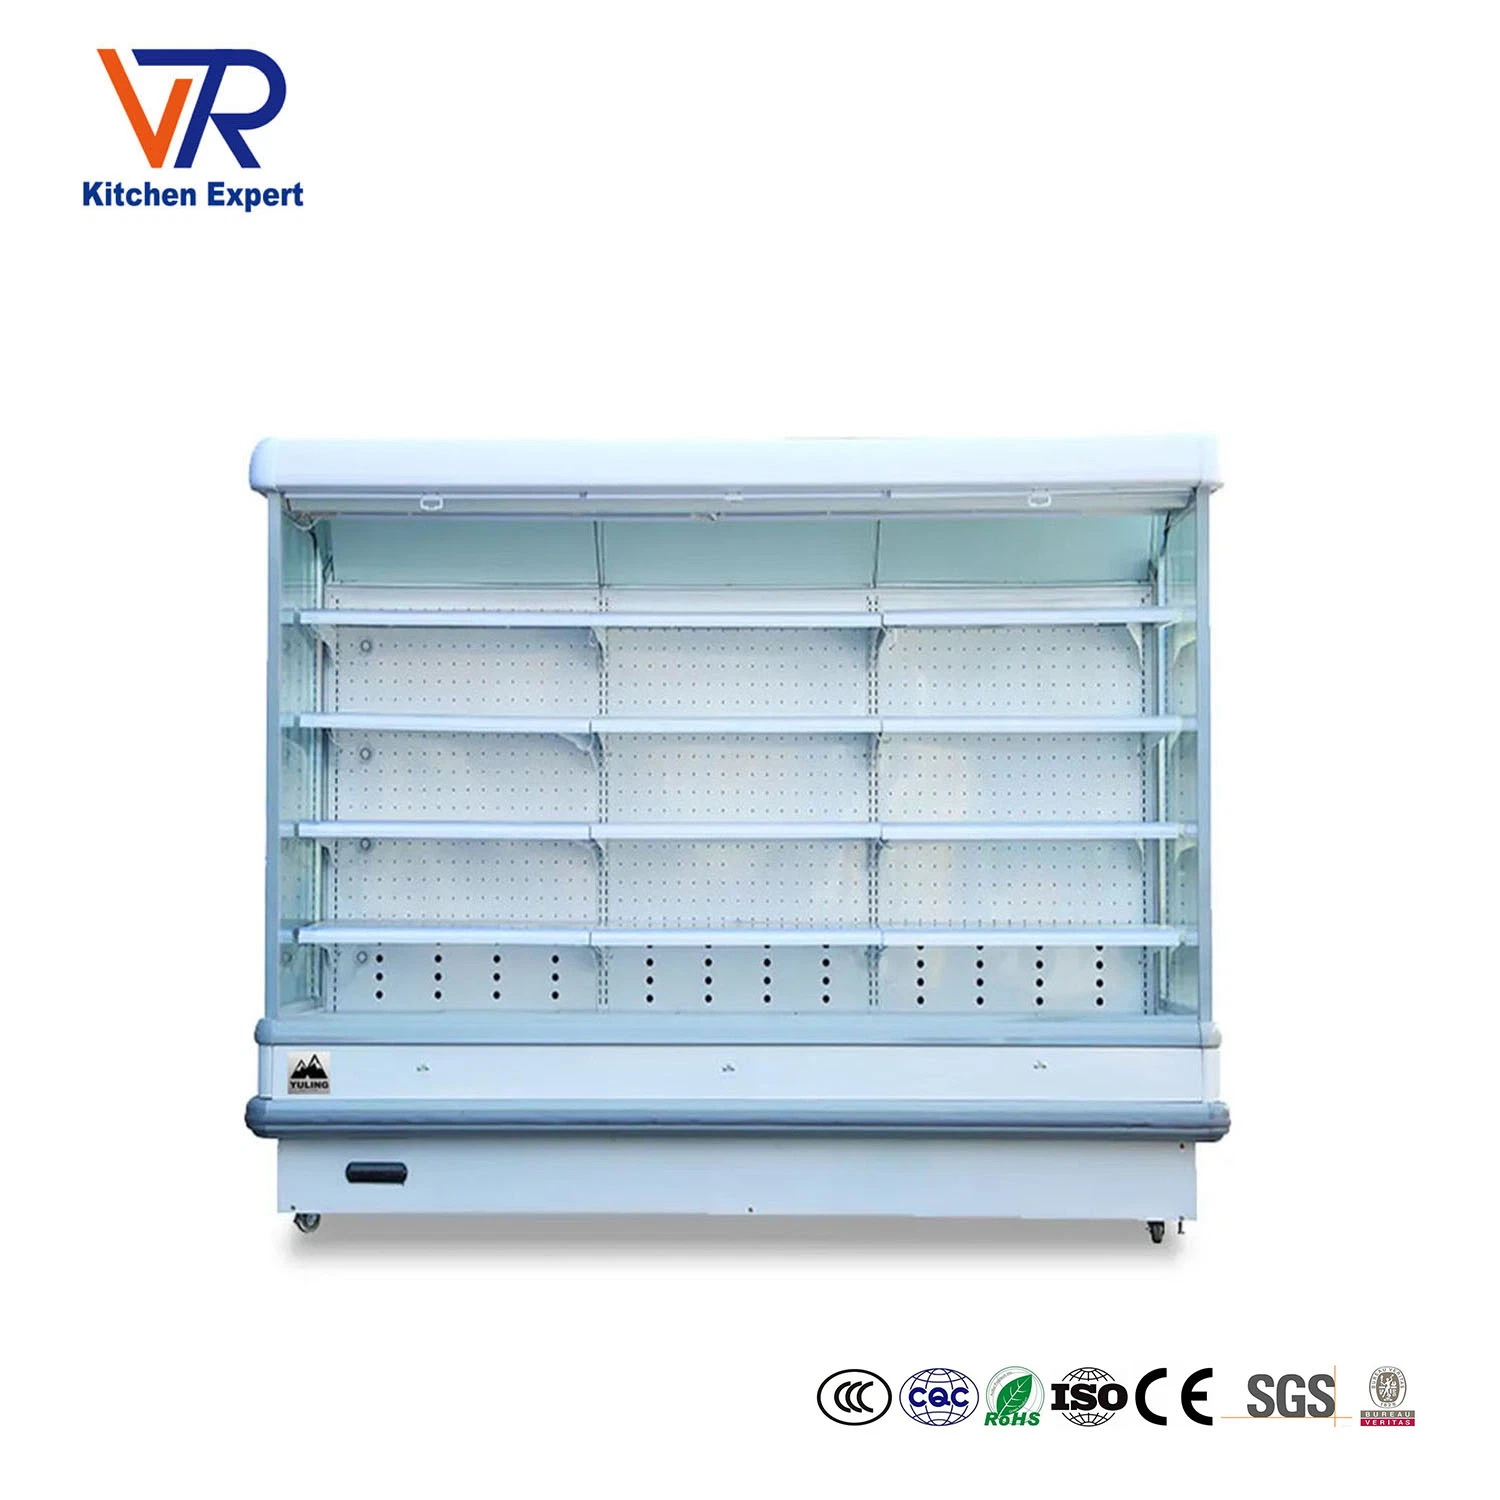 High quality/High cost performance  Fruits and Vegetables Display Refrigerato as Supermarket Refrigeration Equipment